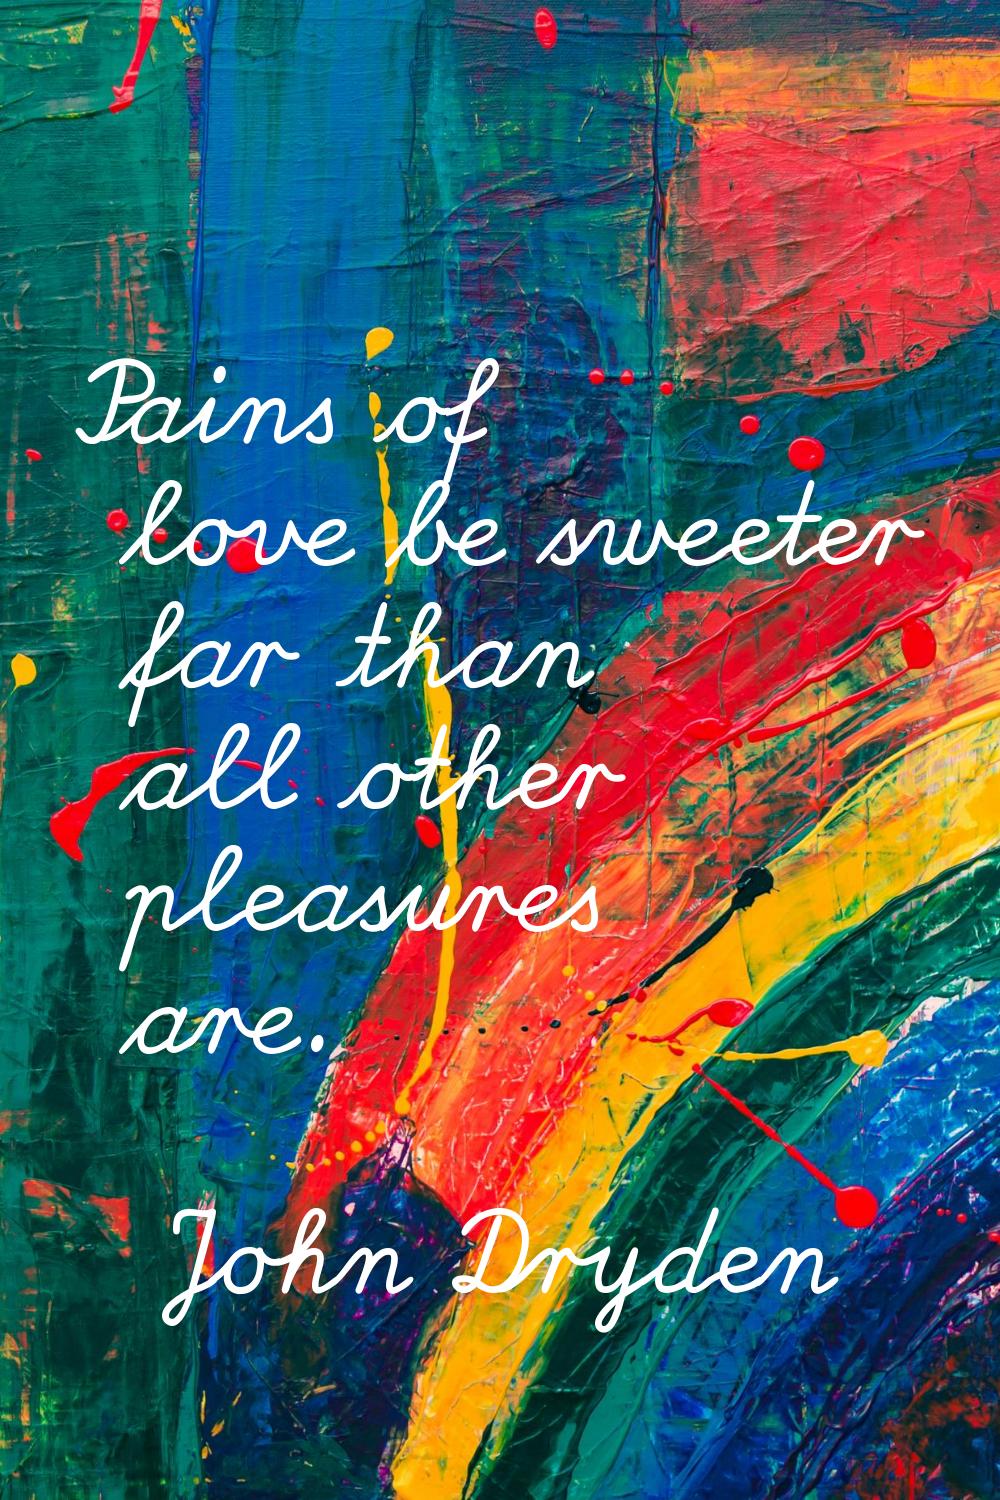 Pains of love be sweeter far than all other pleasures are.